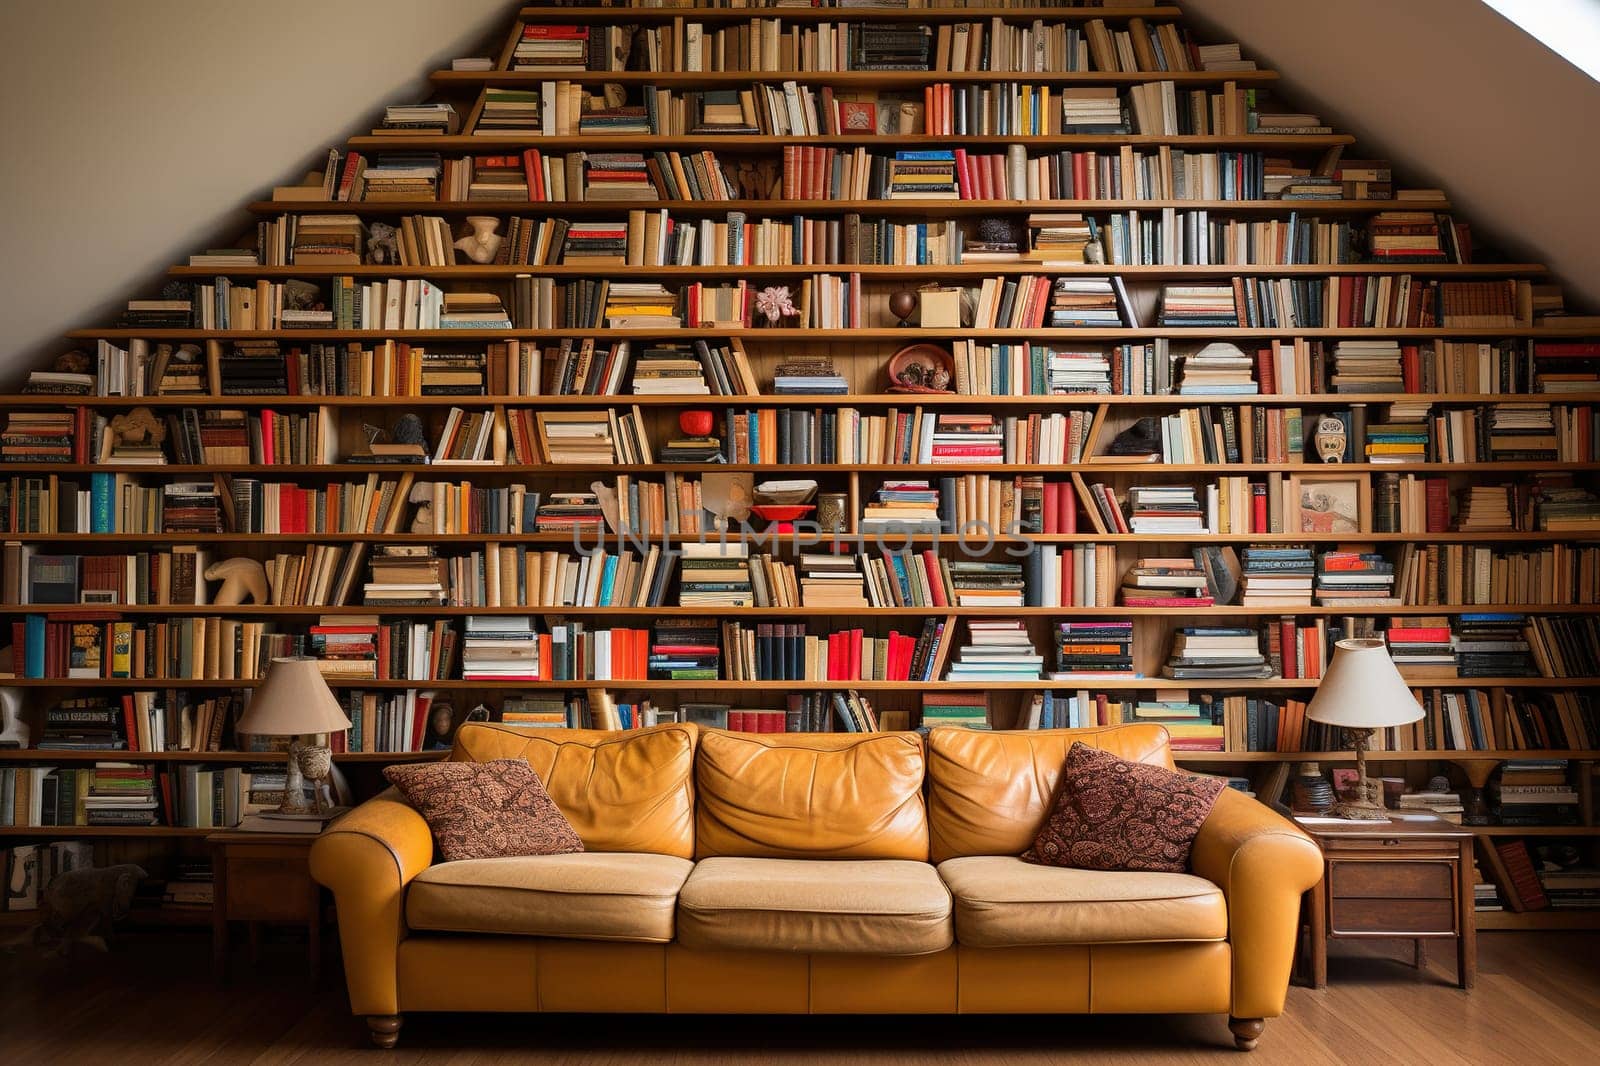 A wall with overflowing bookshelves up to the ceiling, a sofa next to the bookshelves.